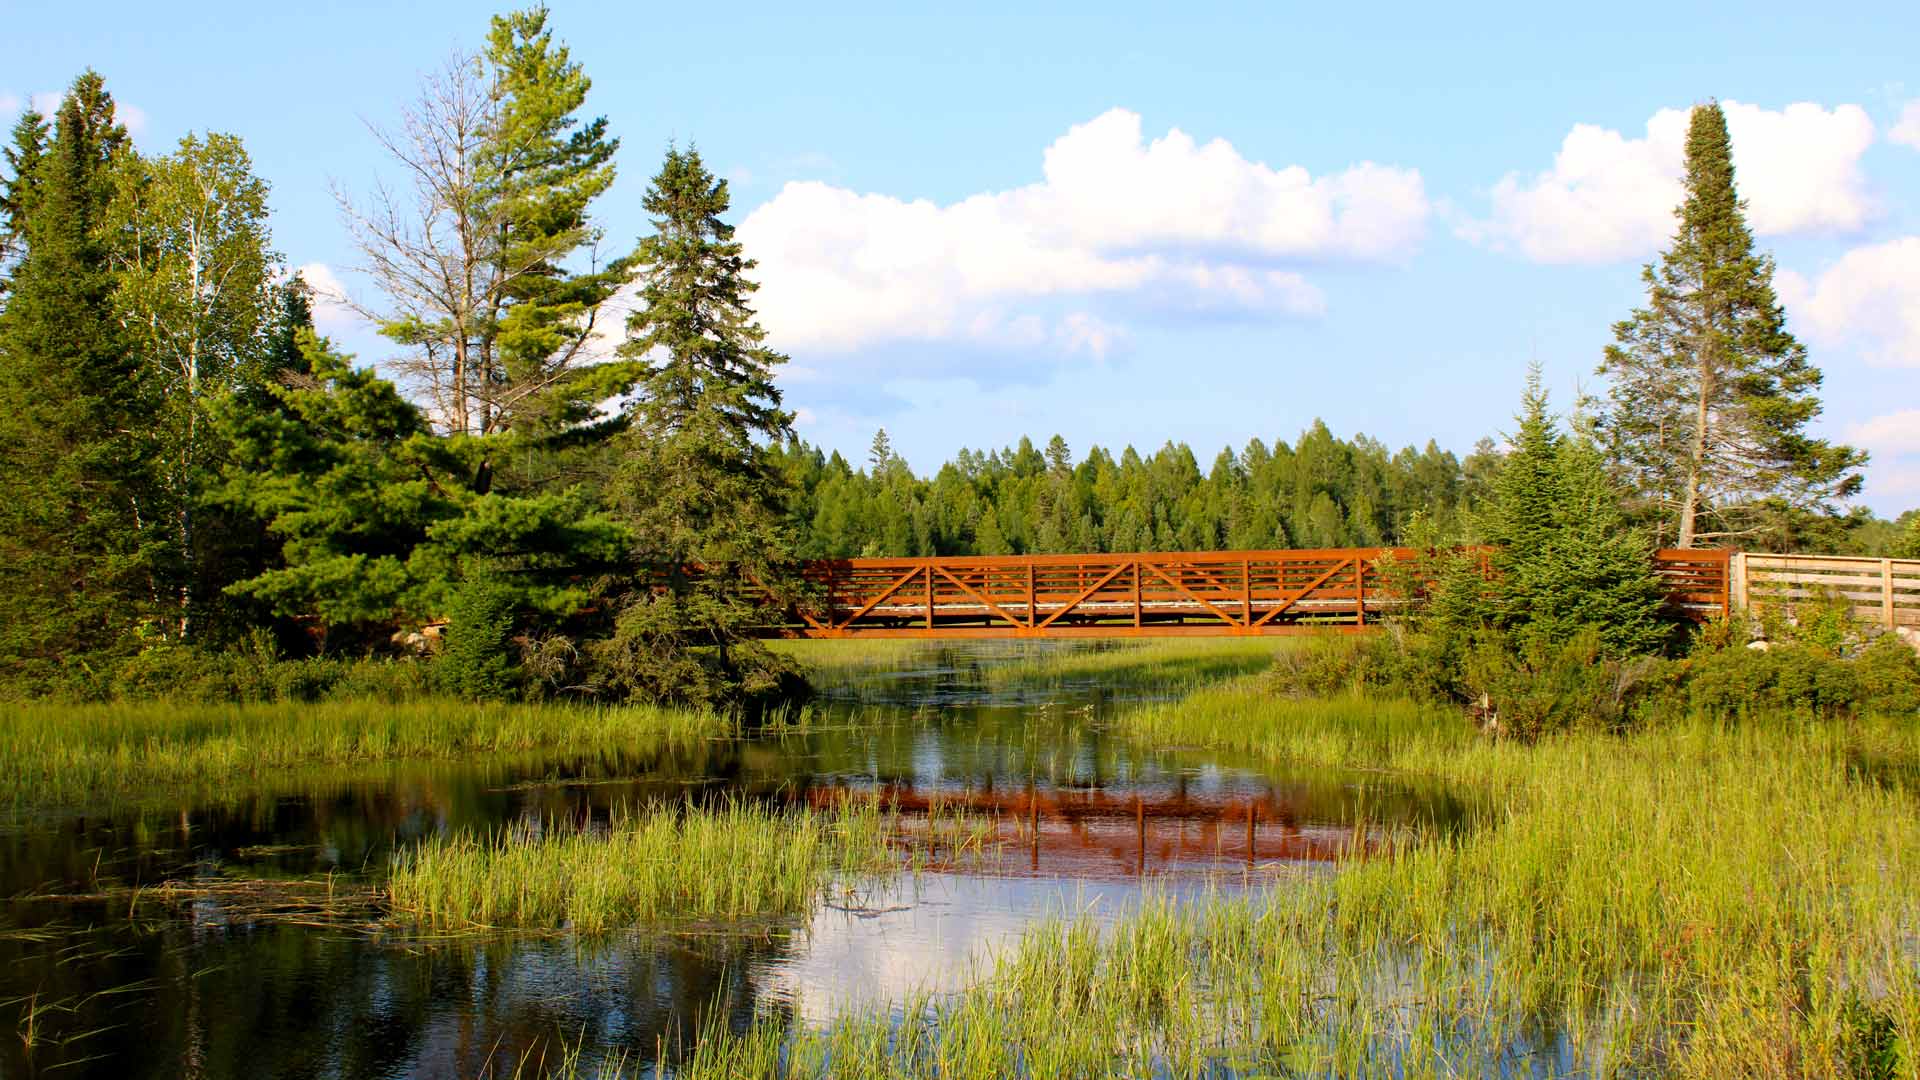 Bridge over a river of Heart of Vilas Trail in Manitowish Waters, Vilas County, Wisconsin